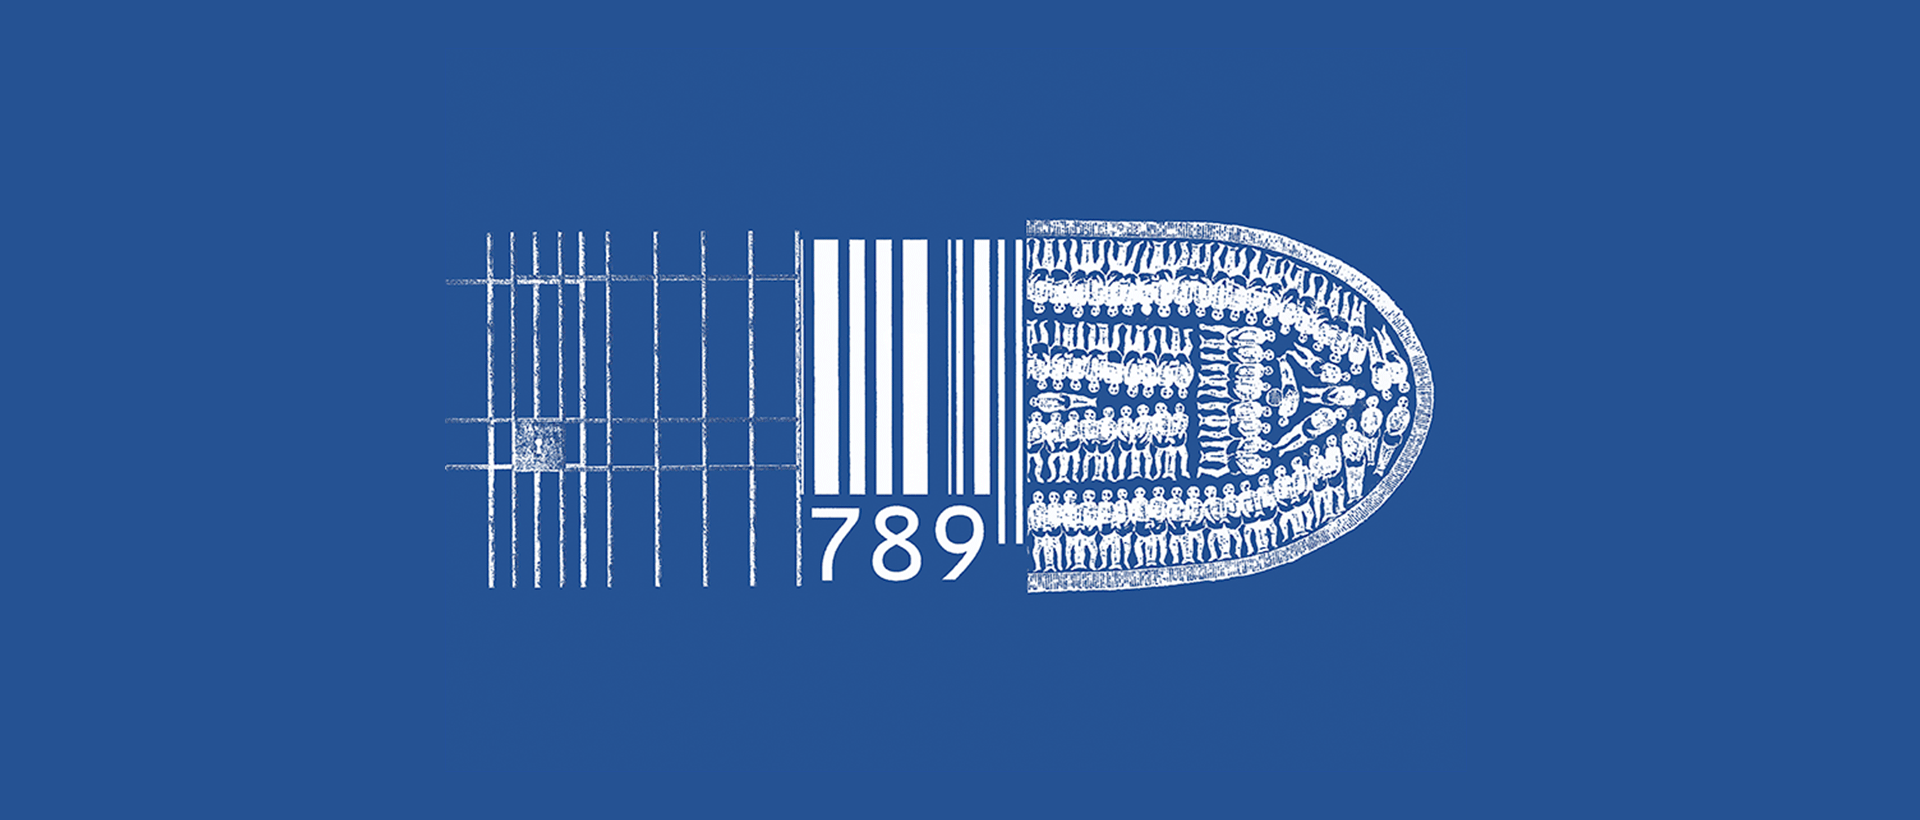 illustration stylized combo of prison cell bars, a barcode, and slave ship diagram